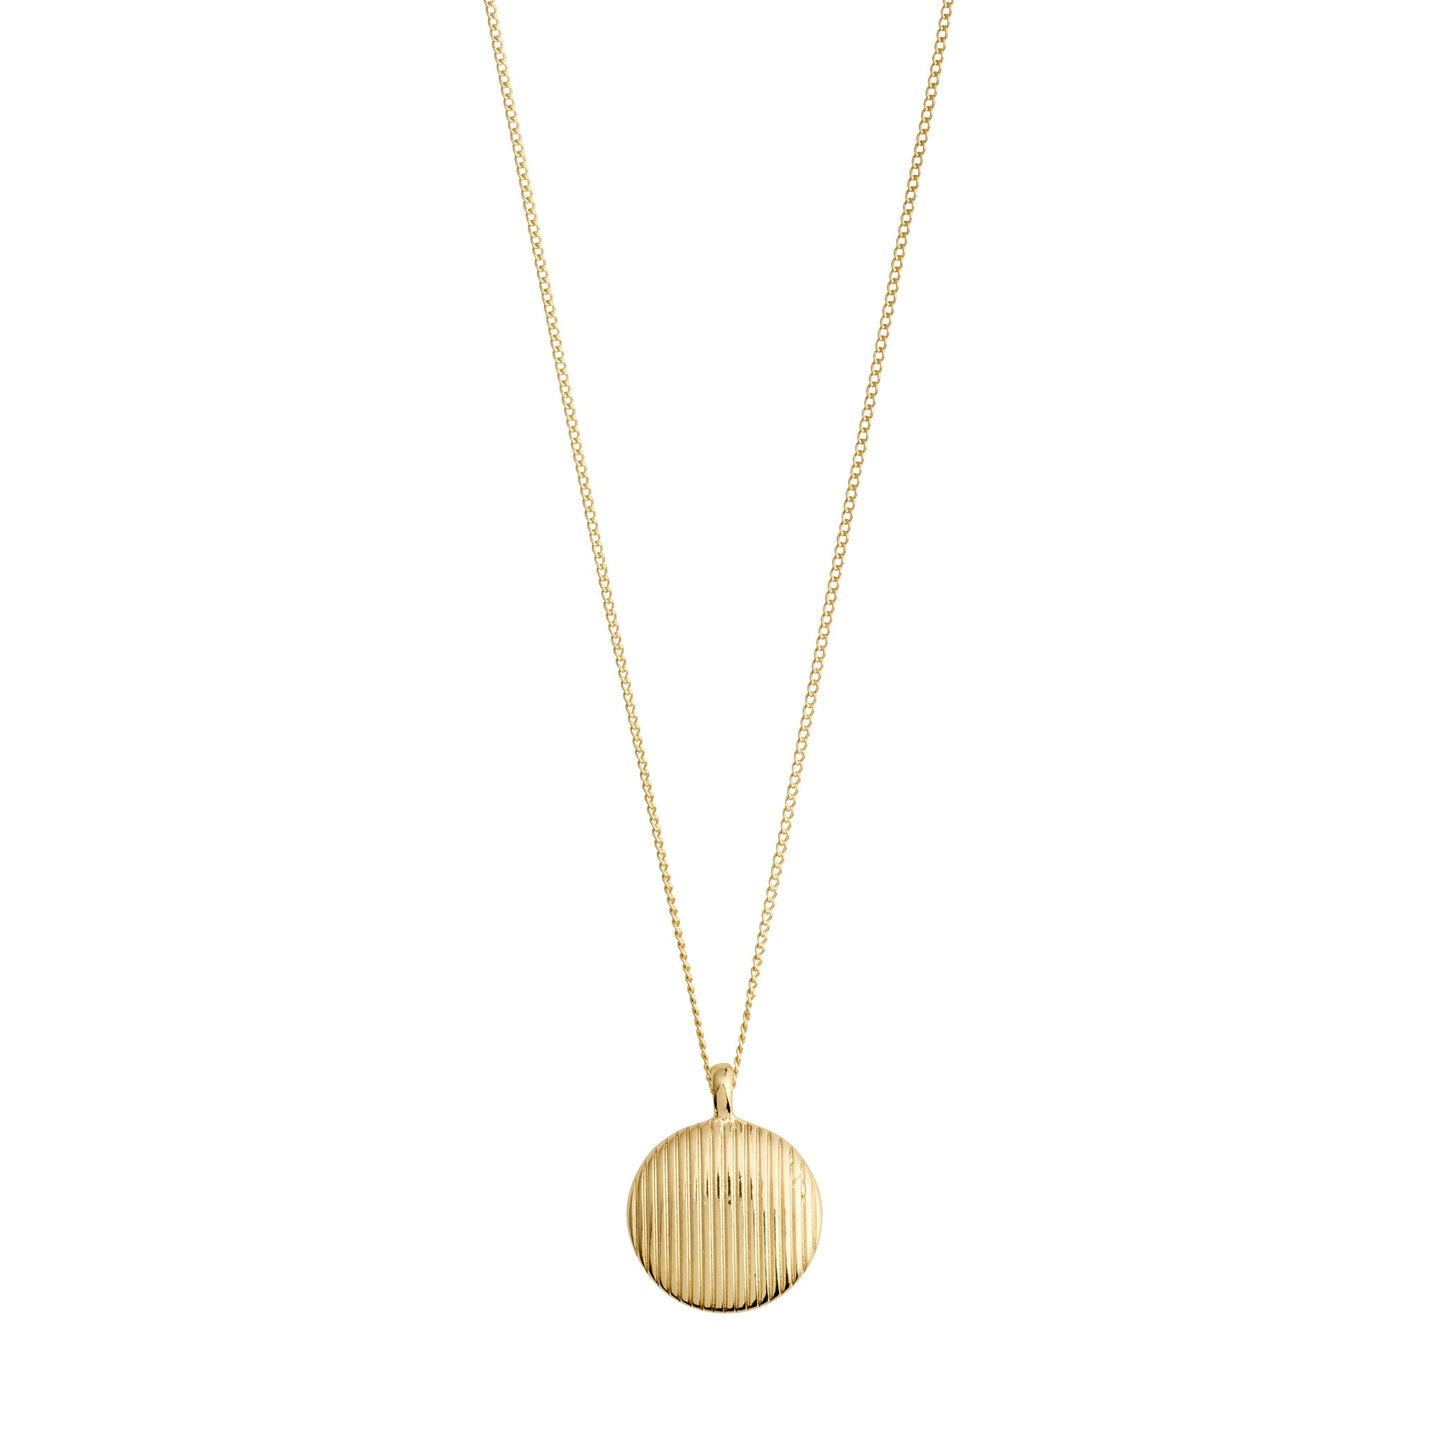 Xena Necklace - Gold Plated